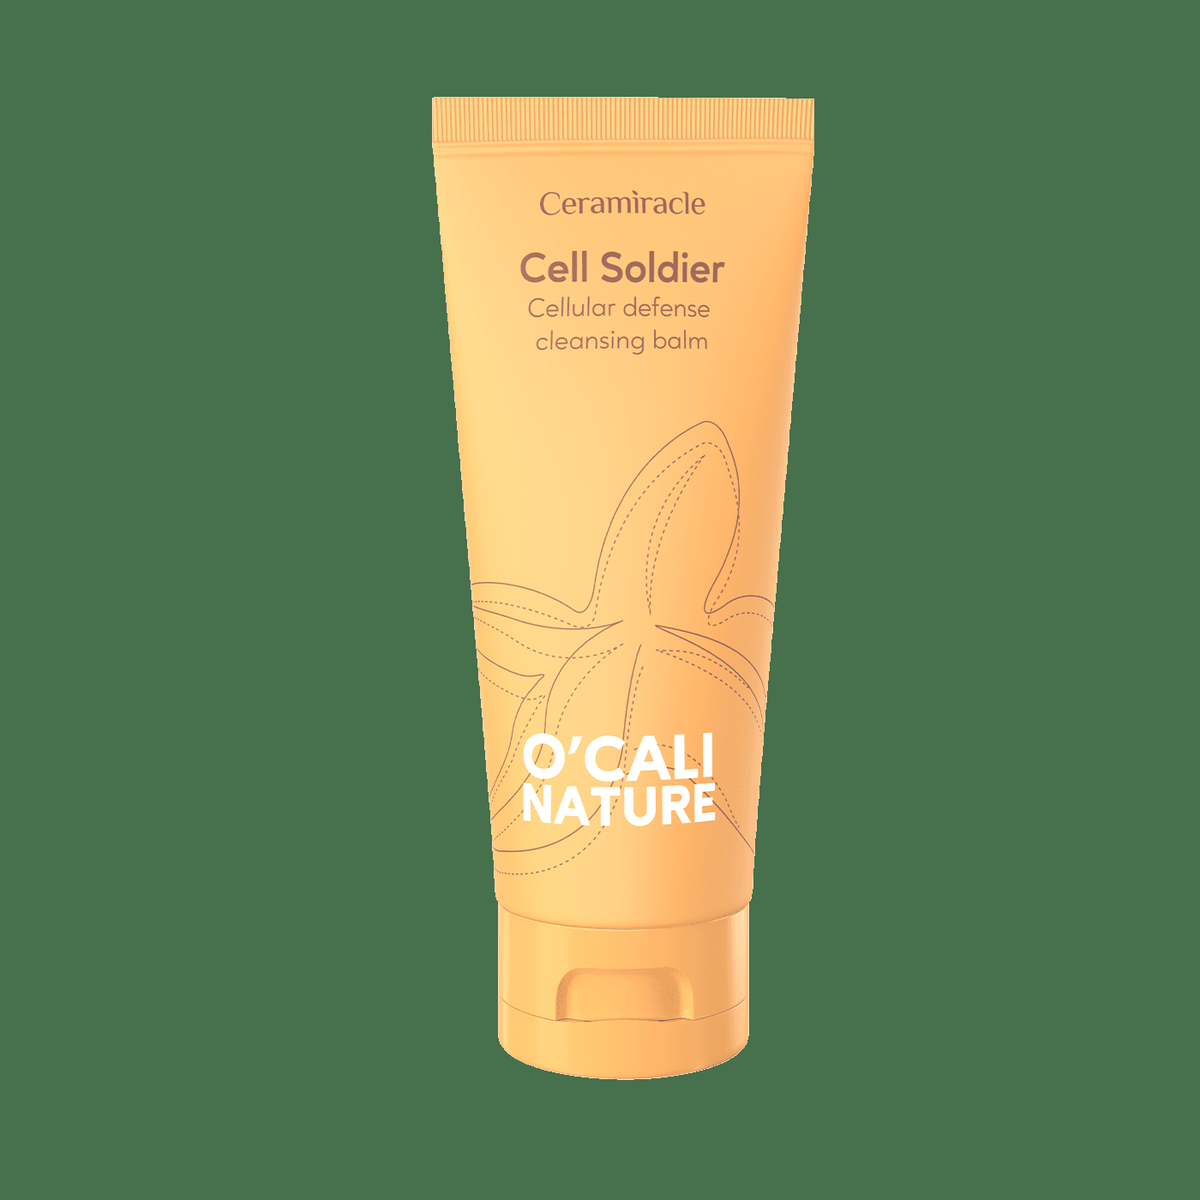 Ceramiracle Cell Soldier Cleansing Balm